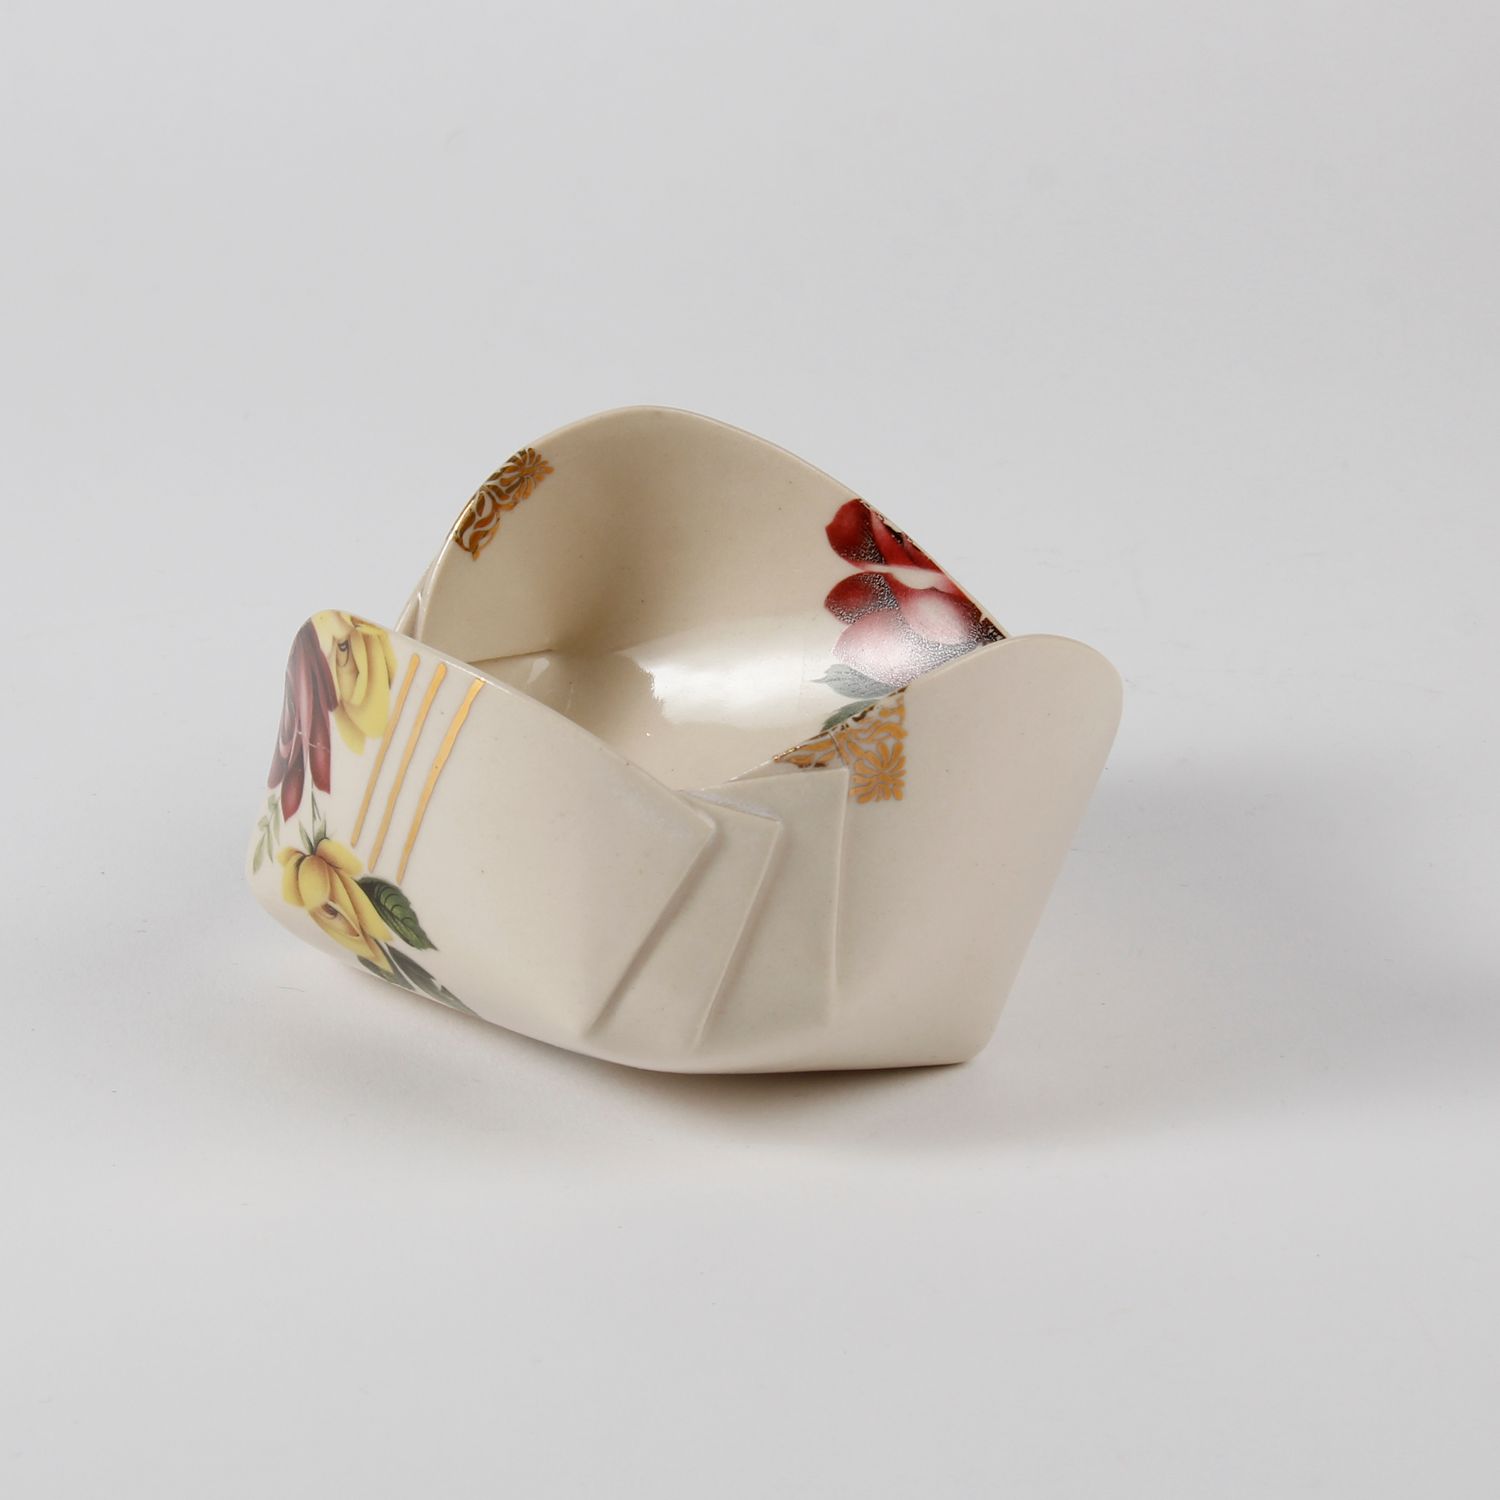 Natalie Waddell: X-Large Floral Bowl Product Image 3 of 7